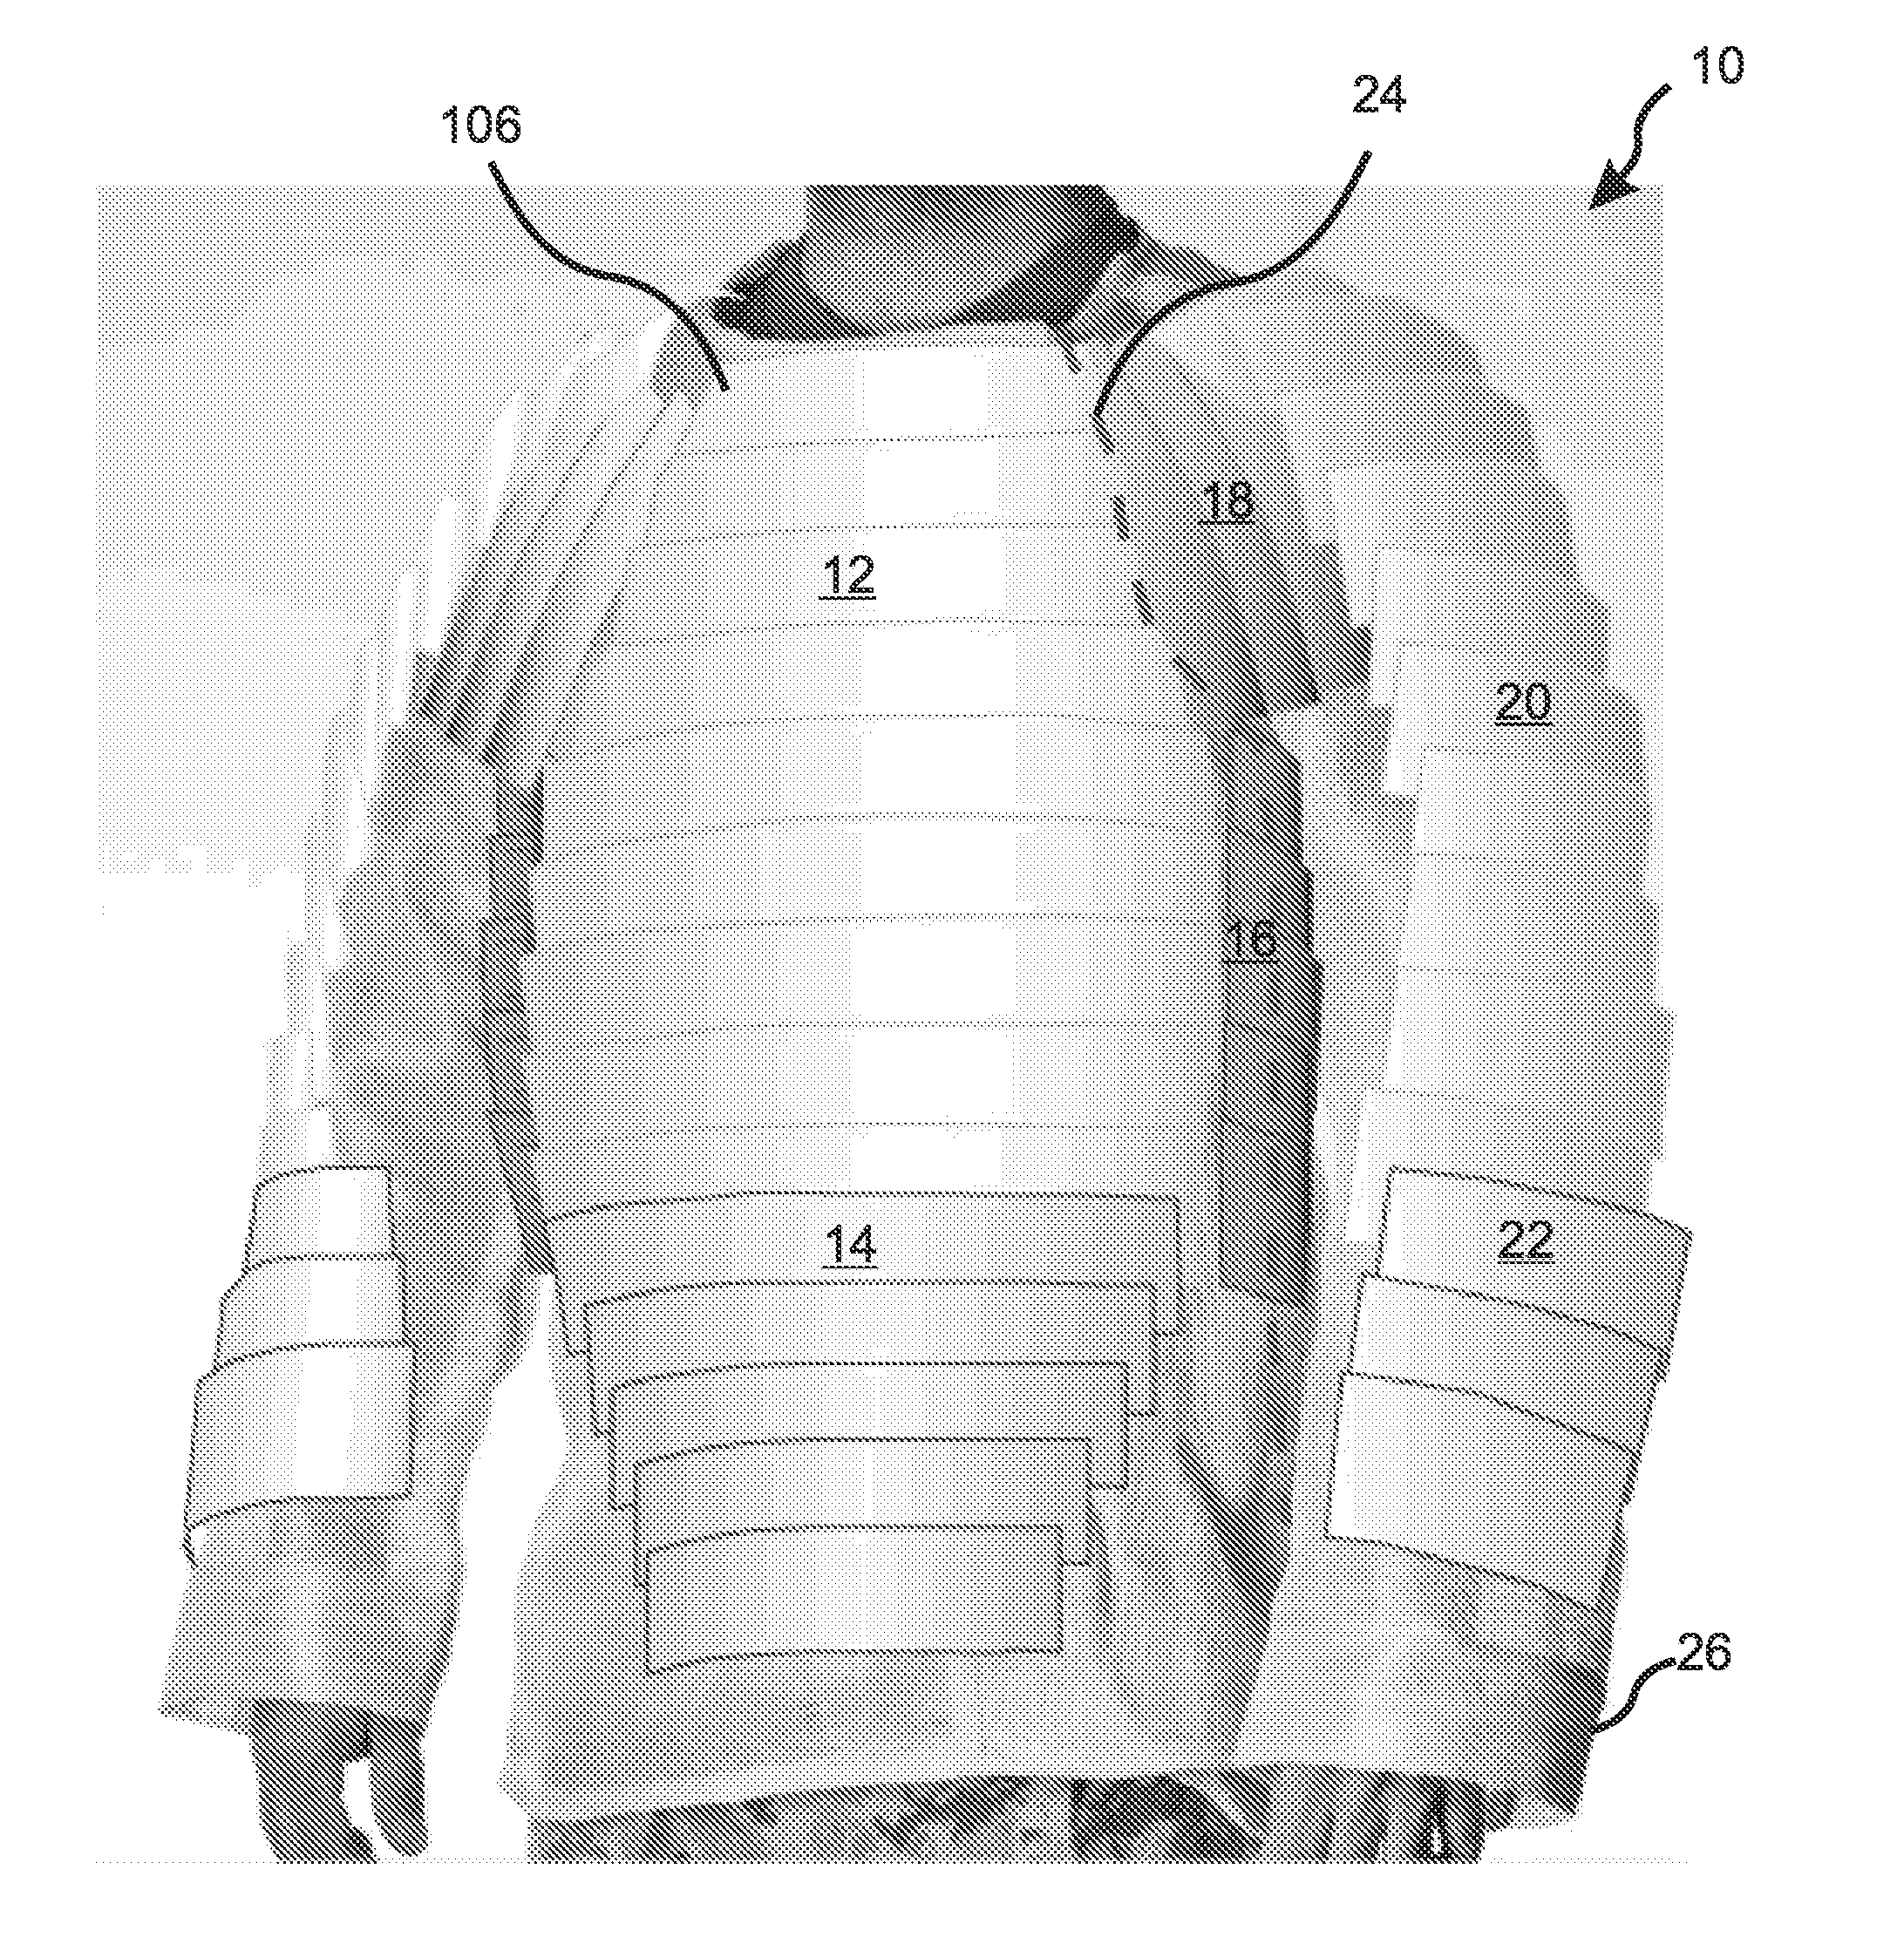 Thermally vented body armor